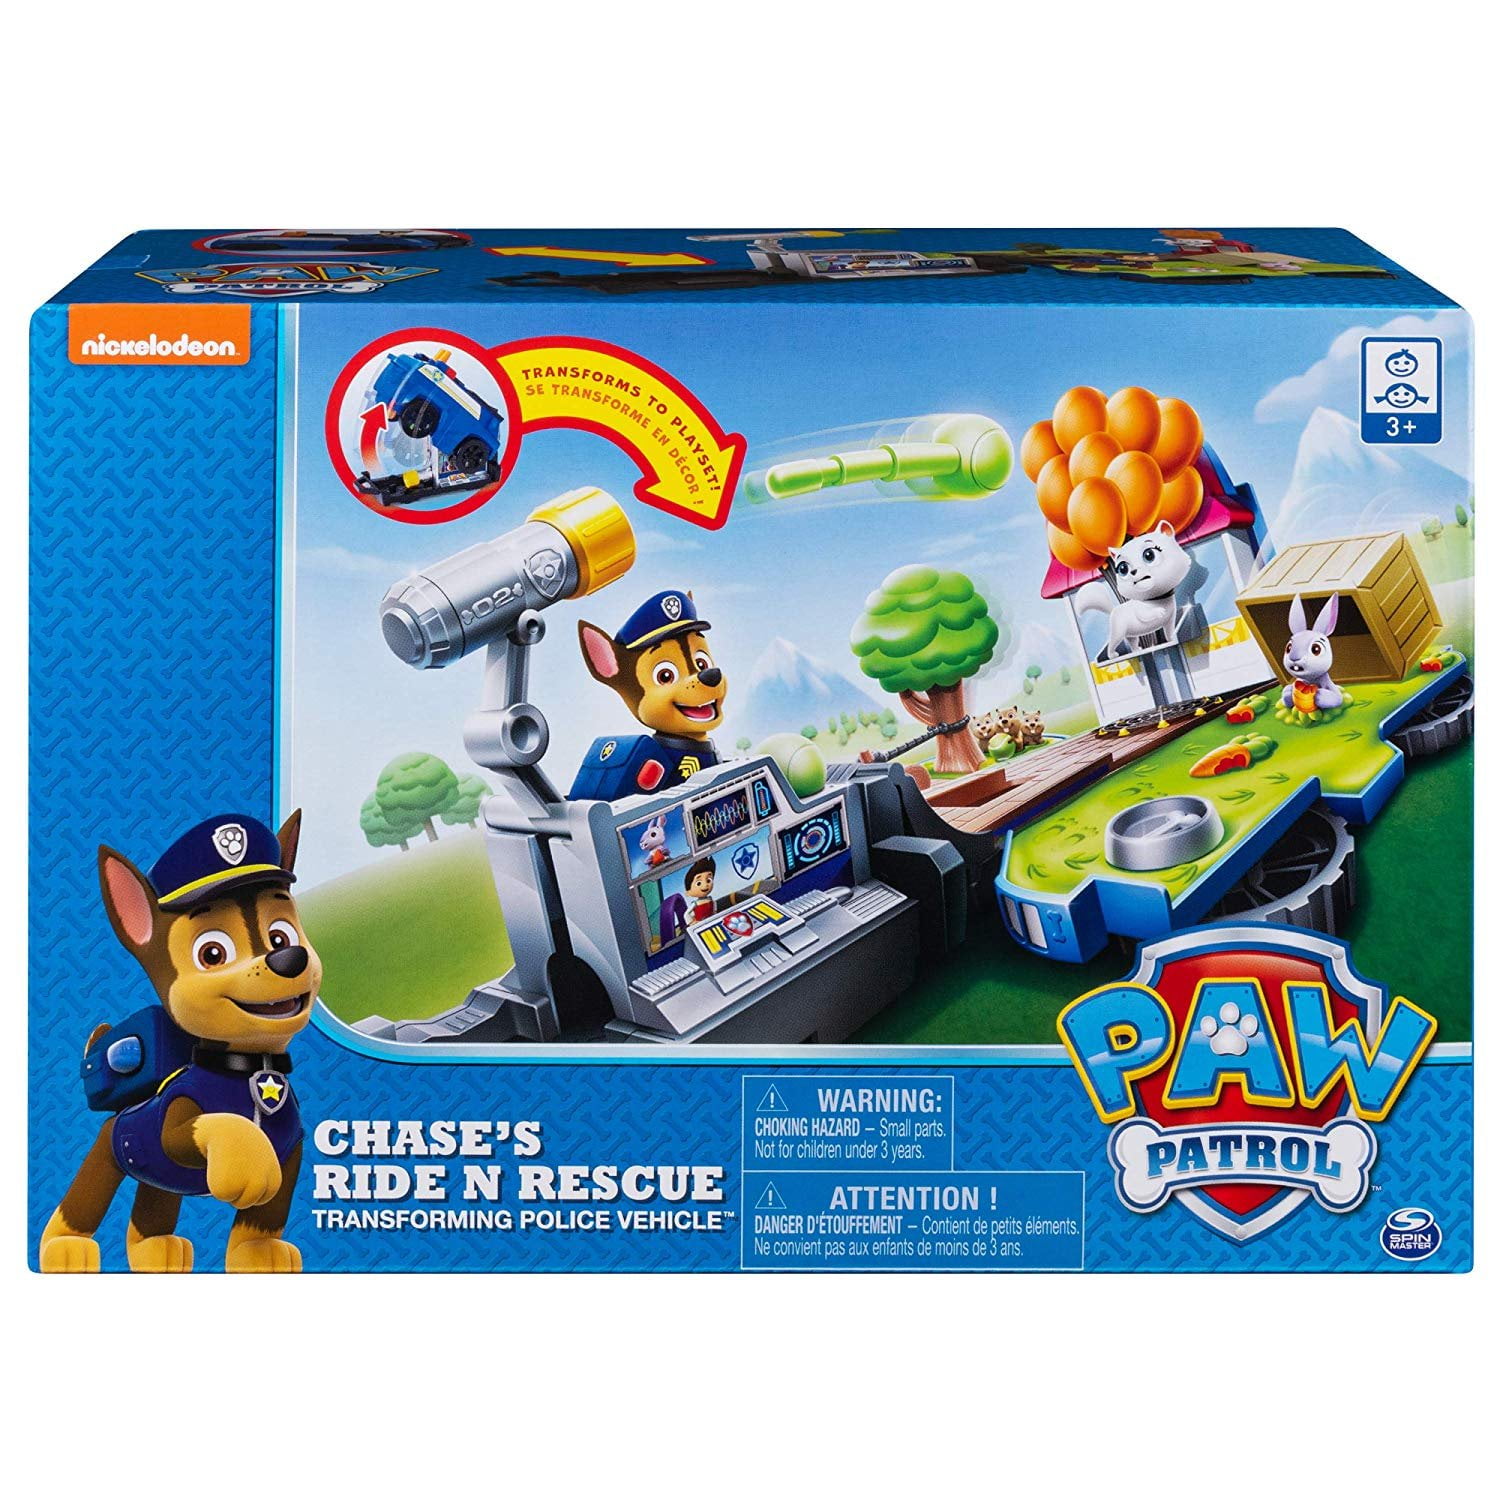 Paw Patrol 6052626 Chase’s Ride ‘n’ Rescue, Transforming 2-in-1 Playset and  Police Cruiser, for Kids Aged 3 and Up, Multicolor